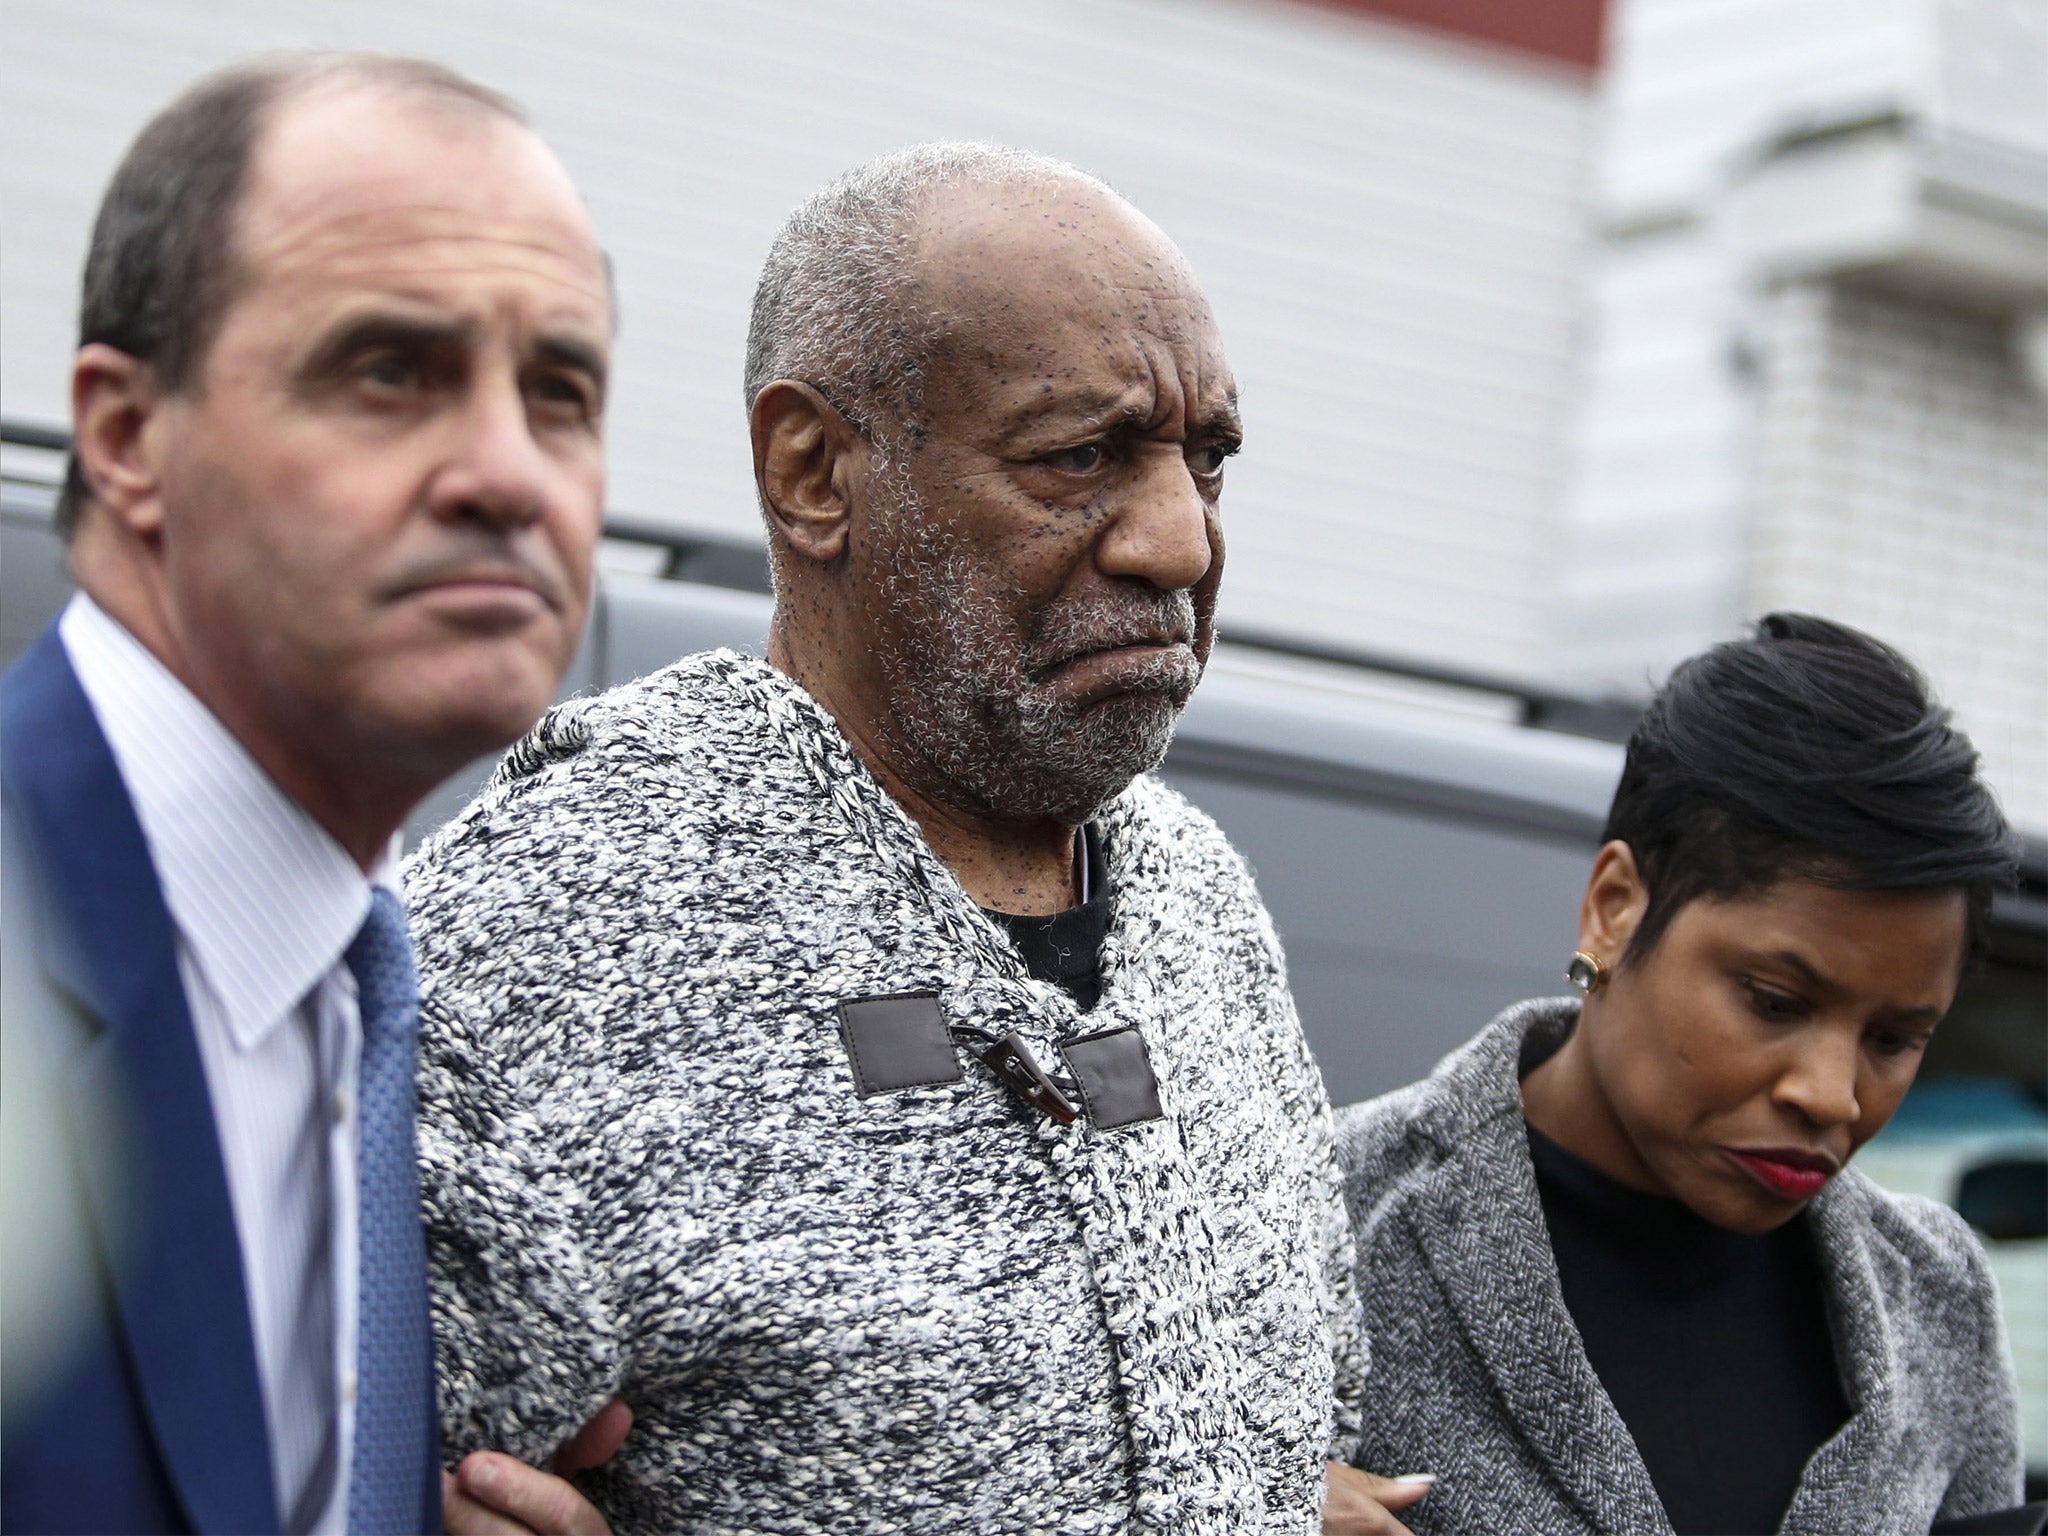 Bill Cosby arrives to the Court House in Elkins Park, Pennsylvania, to face charges of aggravated indecent assault